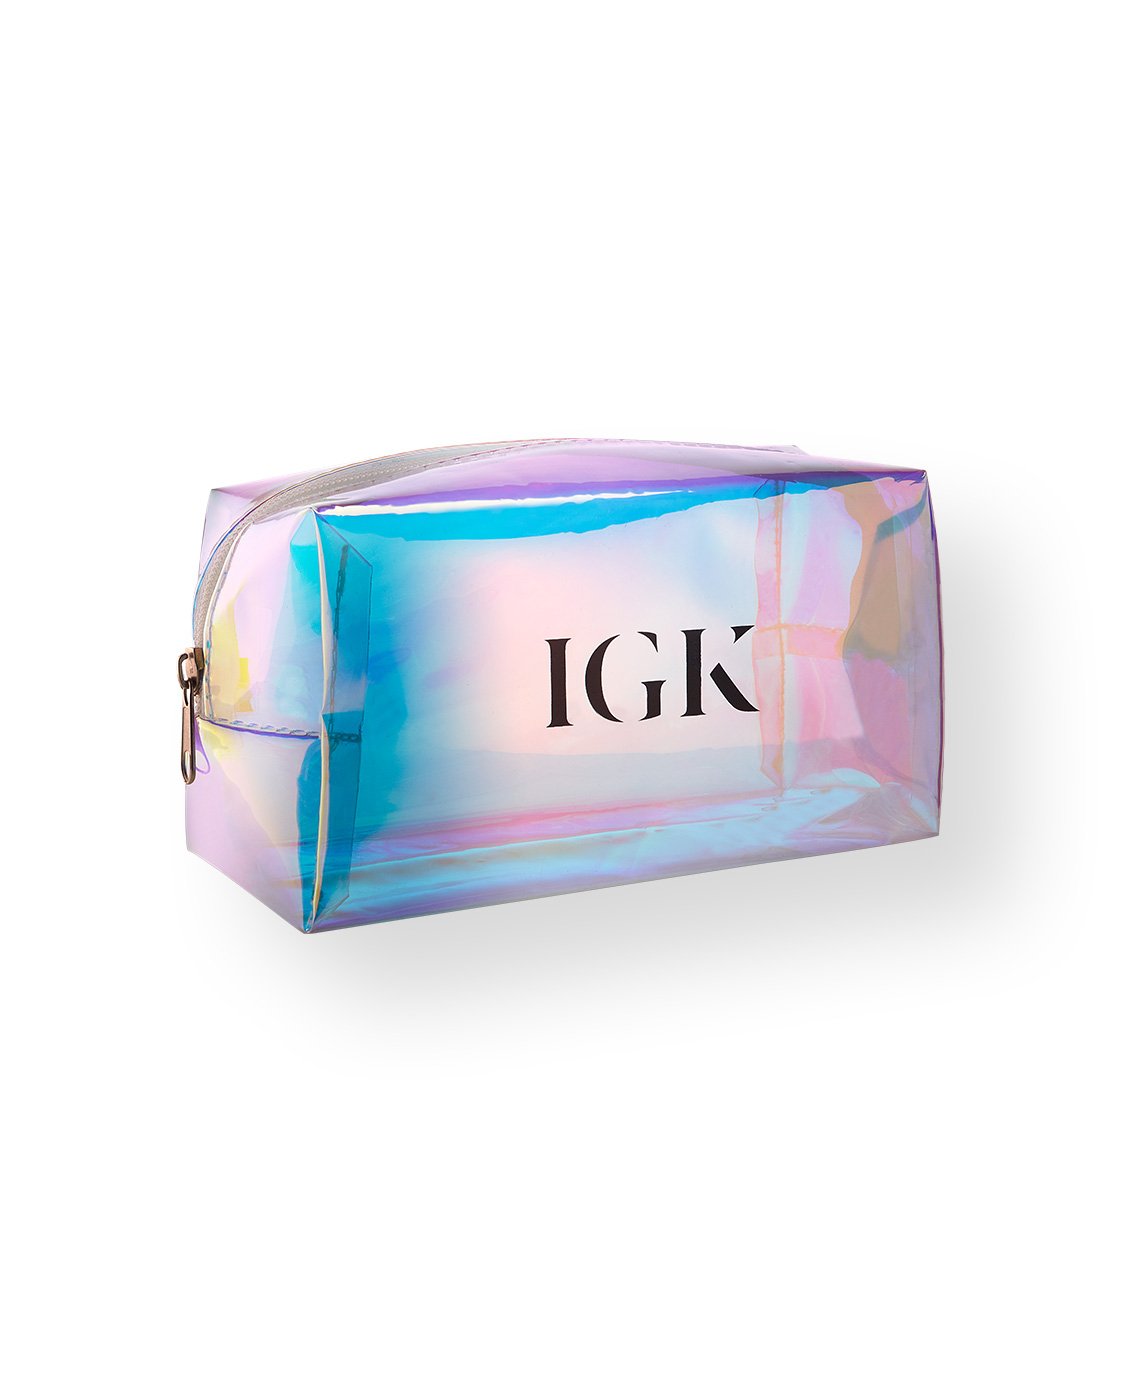 Out of This World Makeup Bag